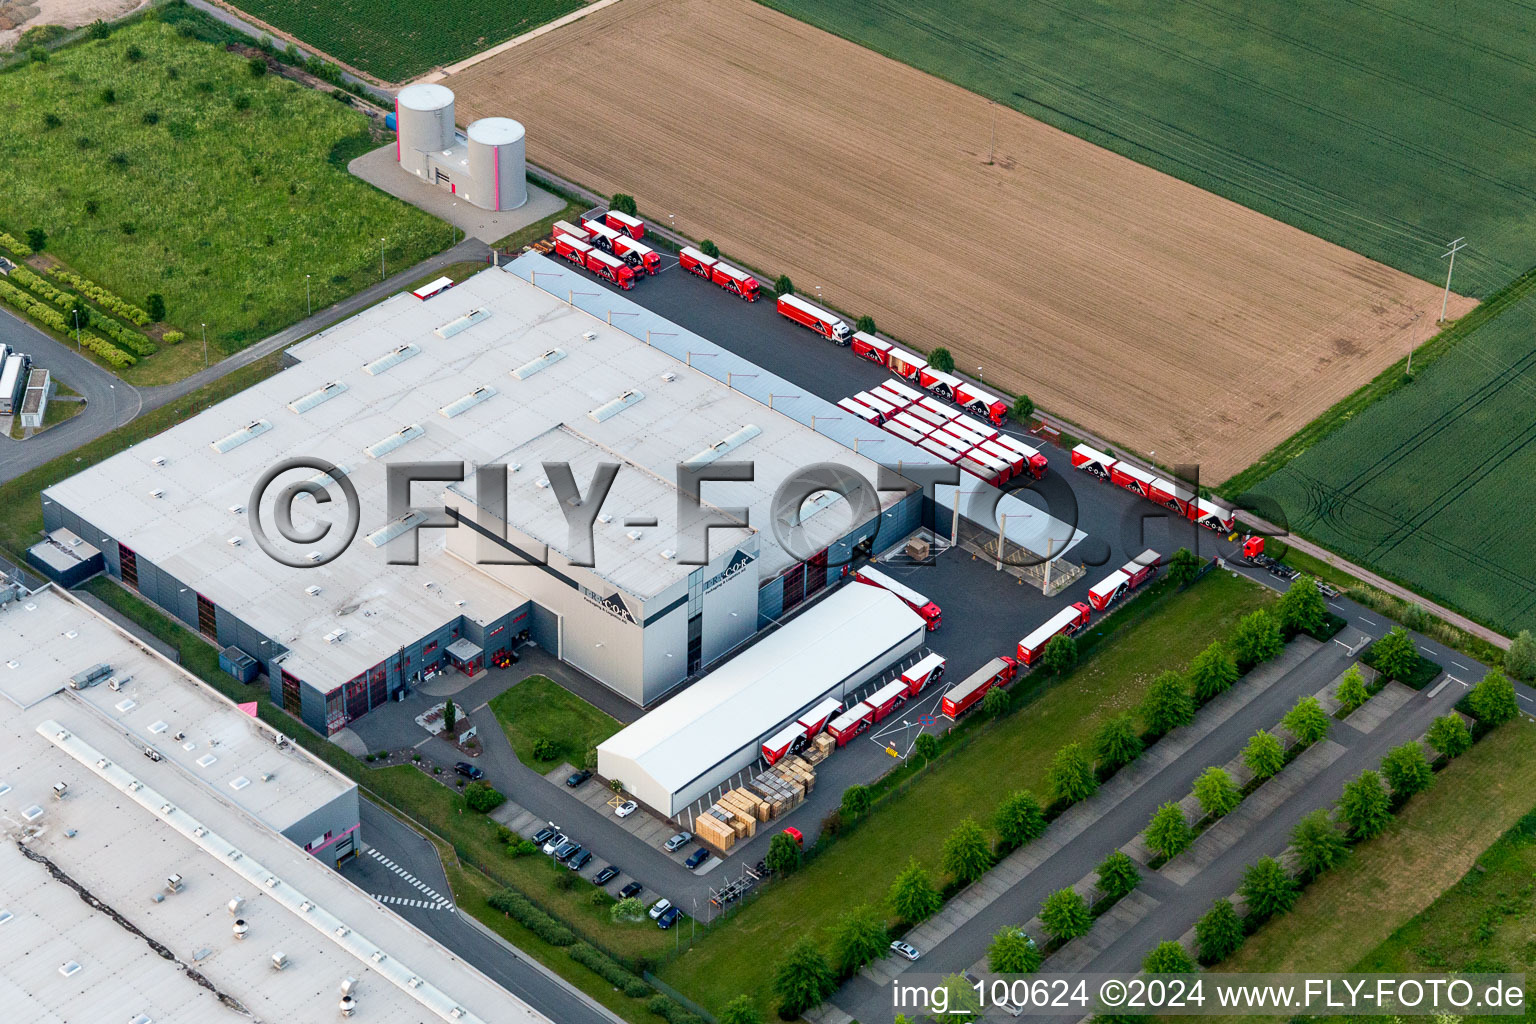 Warehouses and forwarding building of Tricor Packaging & Logistics AG in Offenbach an der Queich in the state Rhineland-Palatinate, Germany